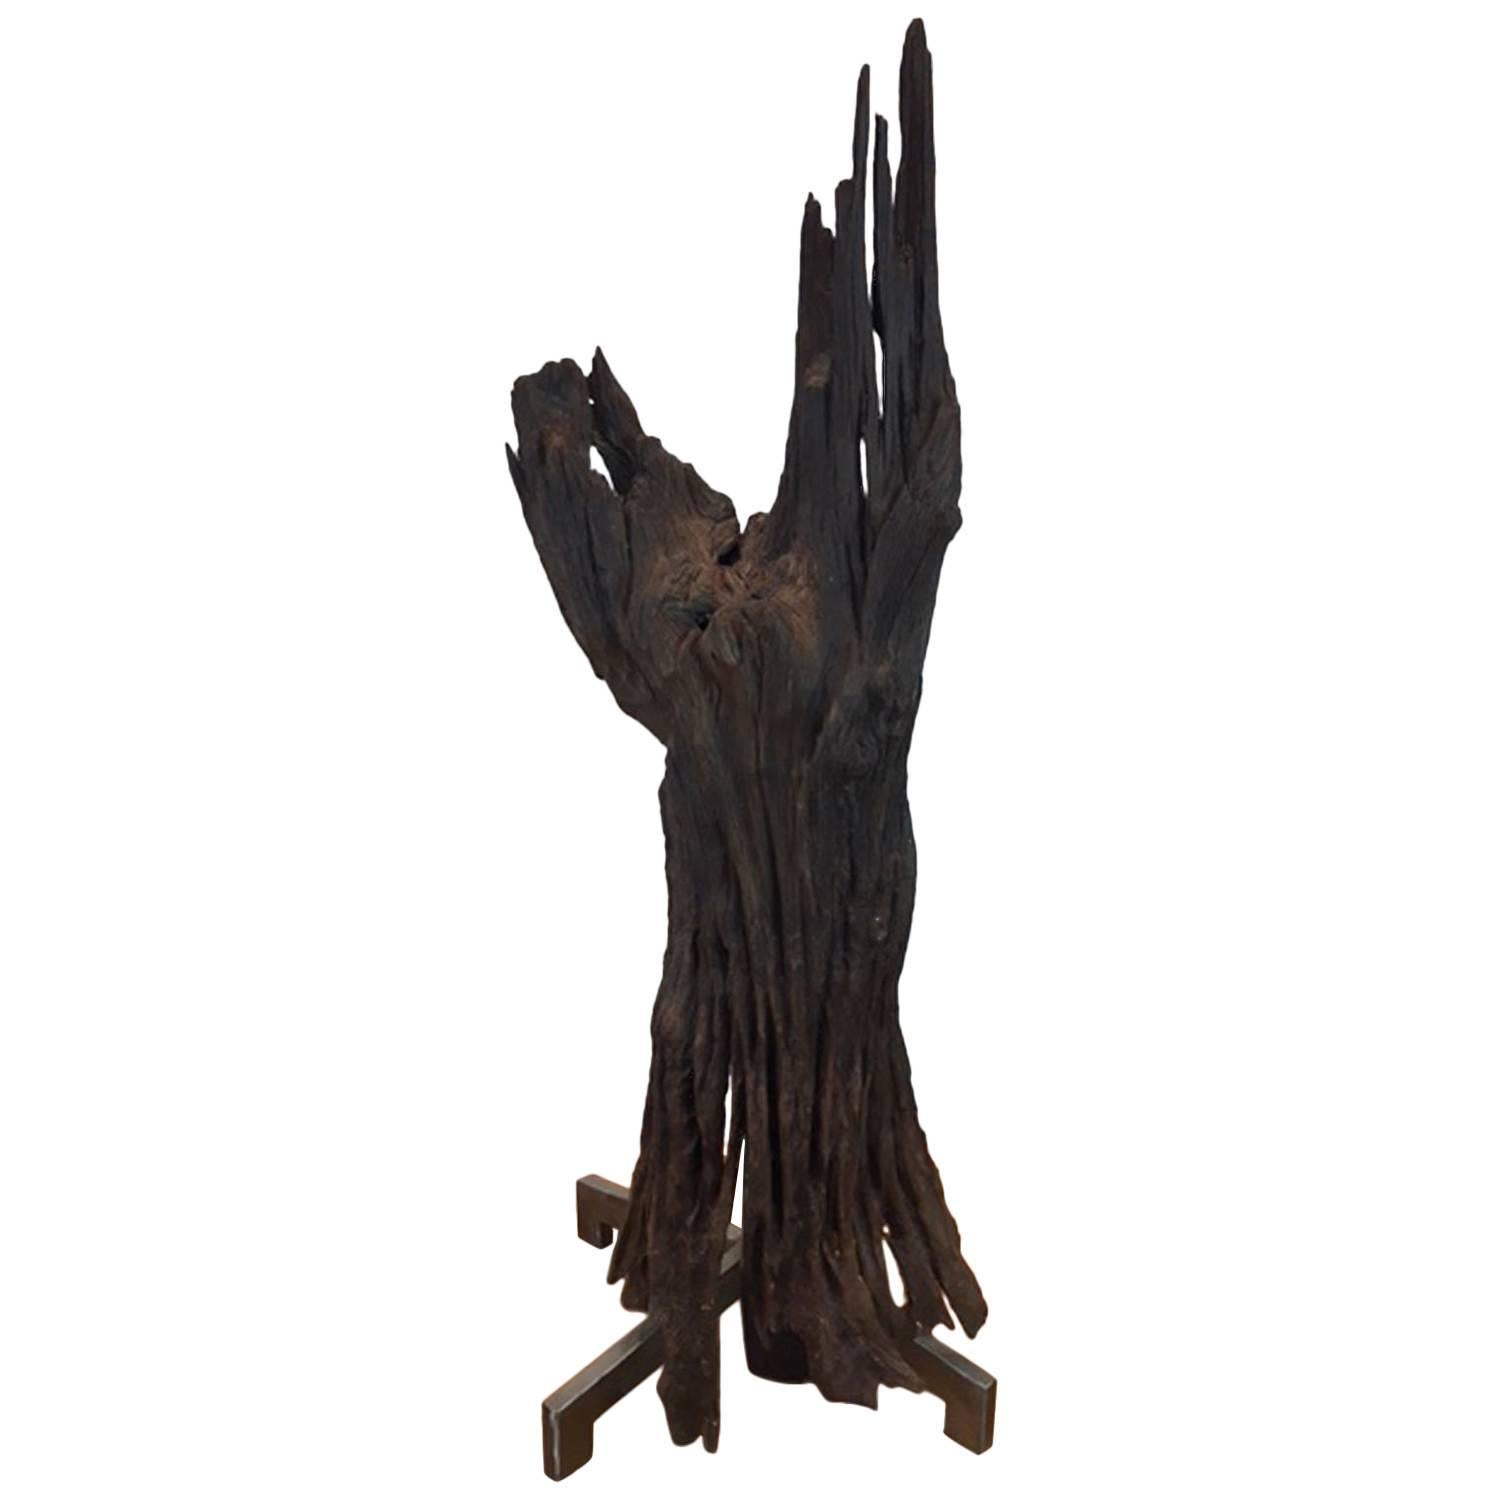 Ironwood and Steel Sculpture For Sale